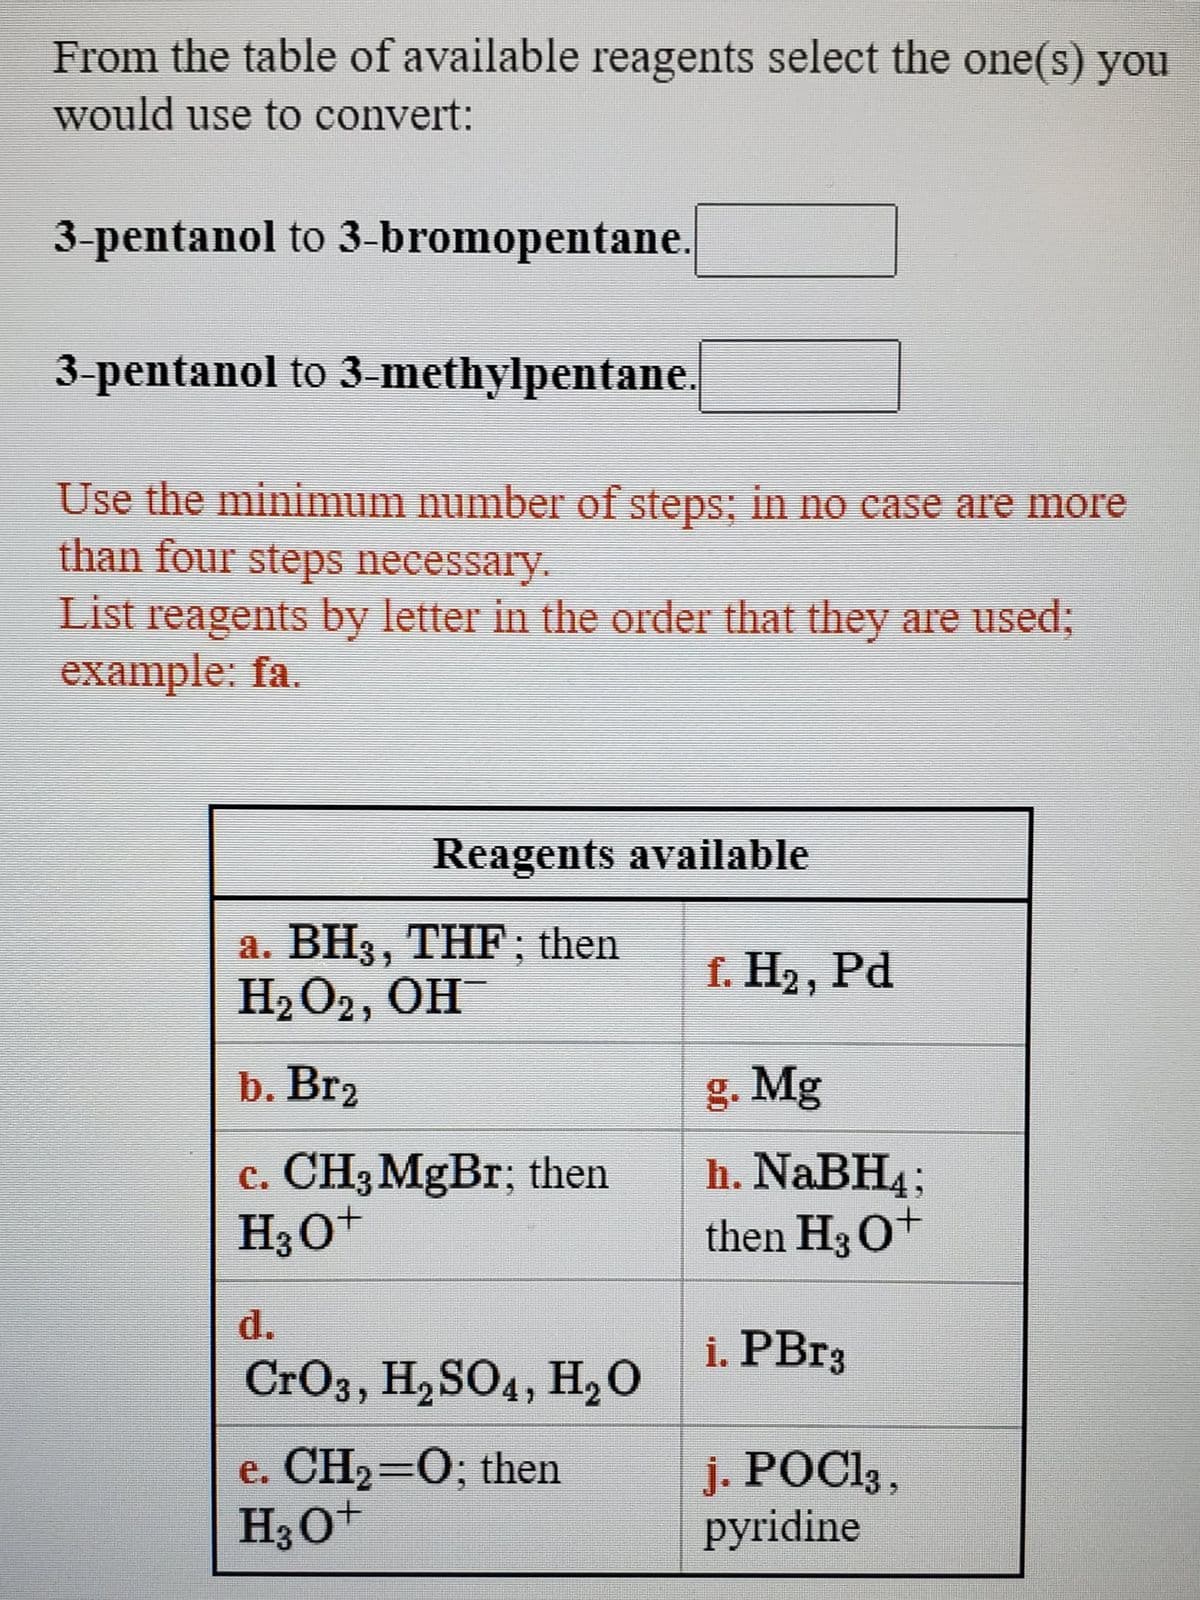 From the table of available reagents select the one(s) you
would use to convert:
3-pentanol to 3-bromopentane.
3-pentanol to 3-methylpentane.
Use the minimum number of steps; in no case are more
than four steps necessary.
List reagents by letter in the order that they are used;
example: fa.
Reagents available
а. ВН3, ТHF; then
H2O2, OH
f. Н2, Pd
b. Br2
g. Mg
c. CH3MgBr; then
H30+
h. NABH4;
then H3O+
d.
i. PB13
CrO3, H, SO4, H20
e. CH2=0; then
H3O+
j. POC1 ,
pyridine
